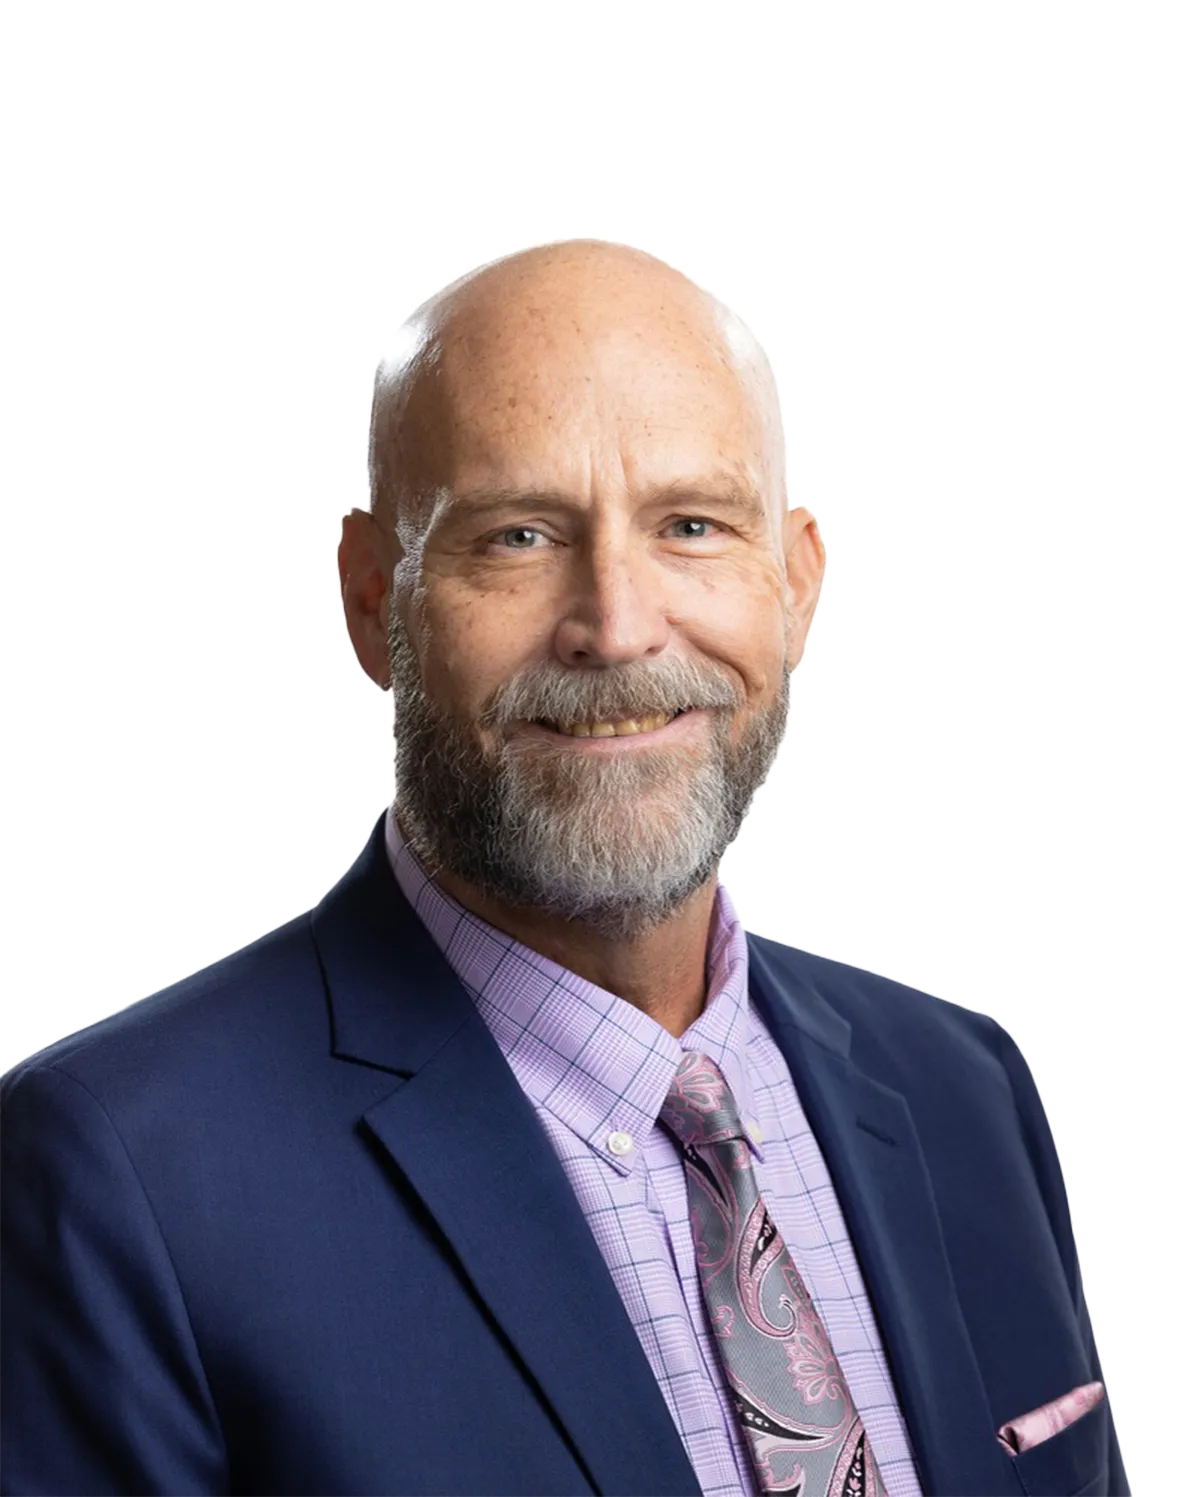 The photo is a professional portrait of Matt Kallunki. He is depicted from the chest up, wearing a smart dark blue suit with a light purple checkered shirt and a matching paisley-patterned tie. Matt has a clean-shaven head, a well-groomed beard, and a warm, welcoming smile. His expression conveys confidence and approachability. The background is a simple, subtle gradient that does not distract from his engaging demeanor. This image is ideal for representing a professional yet personable image on business websites and social media profiles.